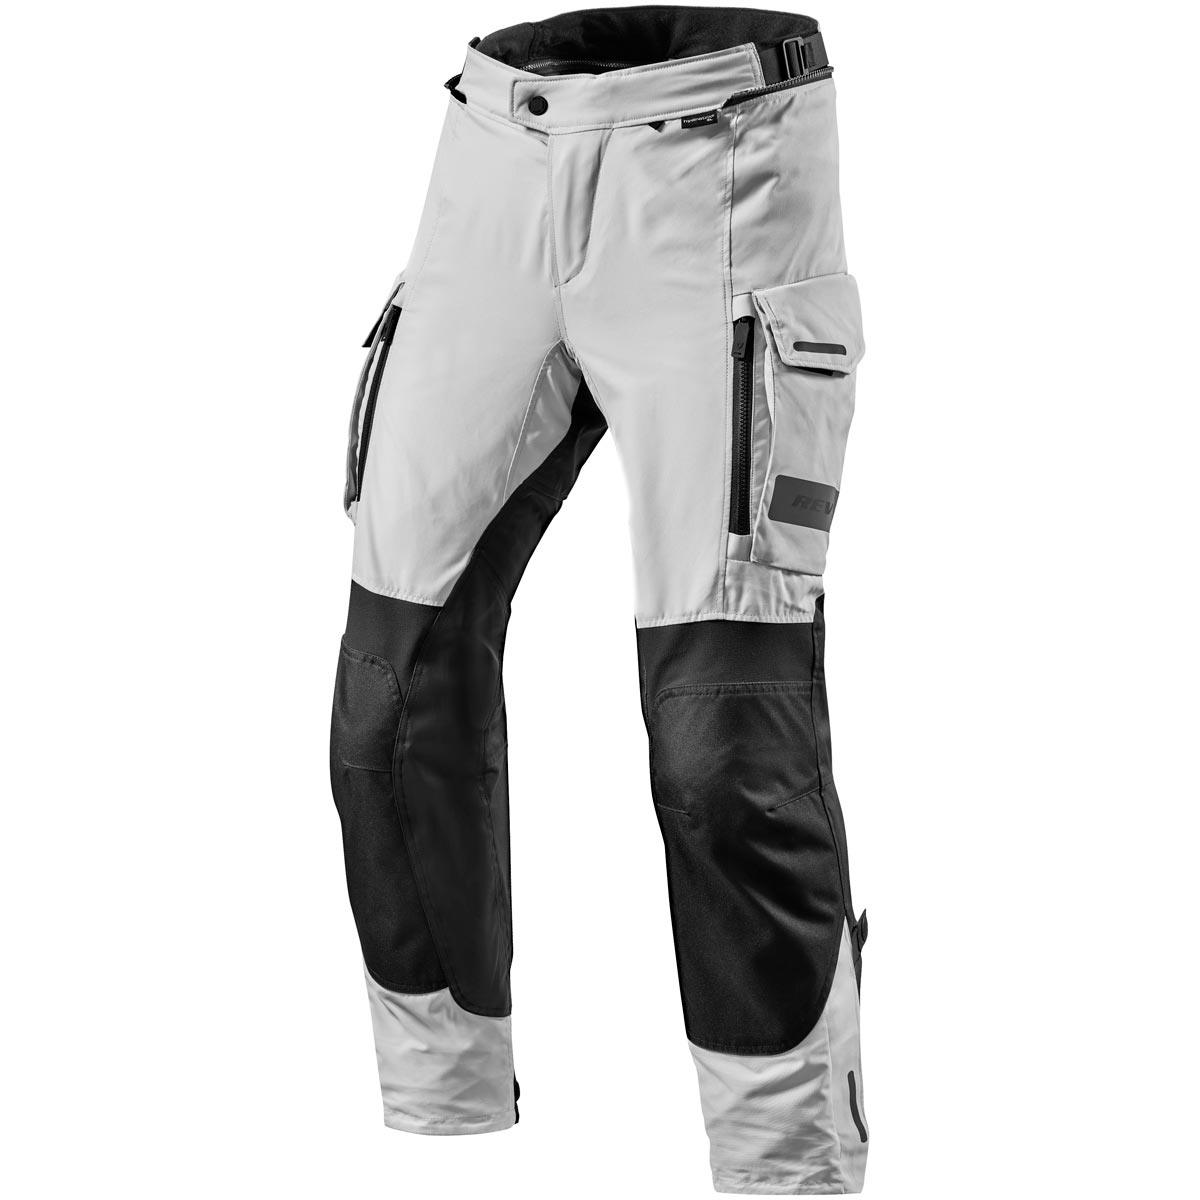 Motorcycle Racing Gear  MOTORCYCLE PANTS  Motorcycle Jeans  CE  Armoured Mens Motorcycle Jeans Motorbike Trousers Denim Pant Made with  Kevlar  Valuesbig  Retail from factories  FREE SHIPPING